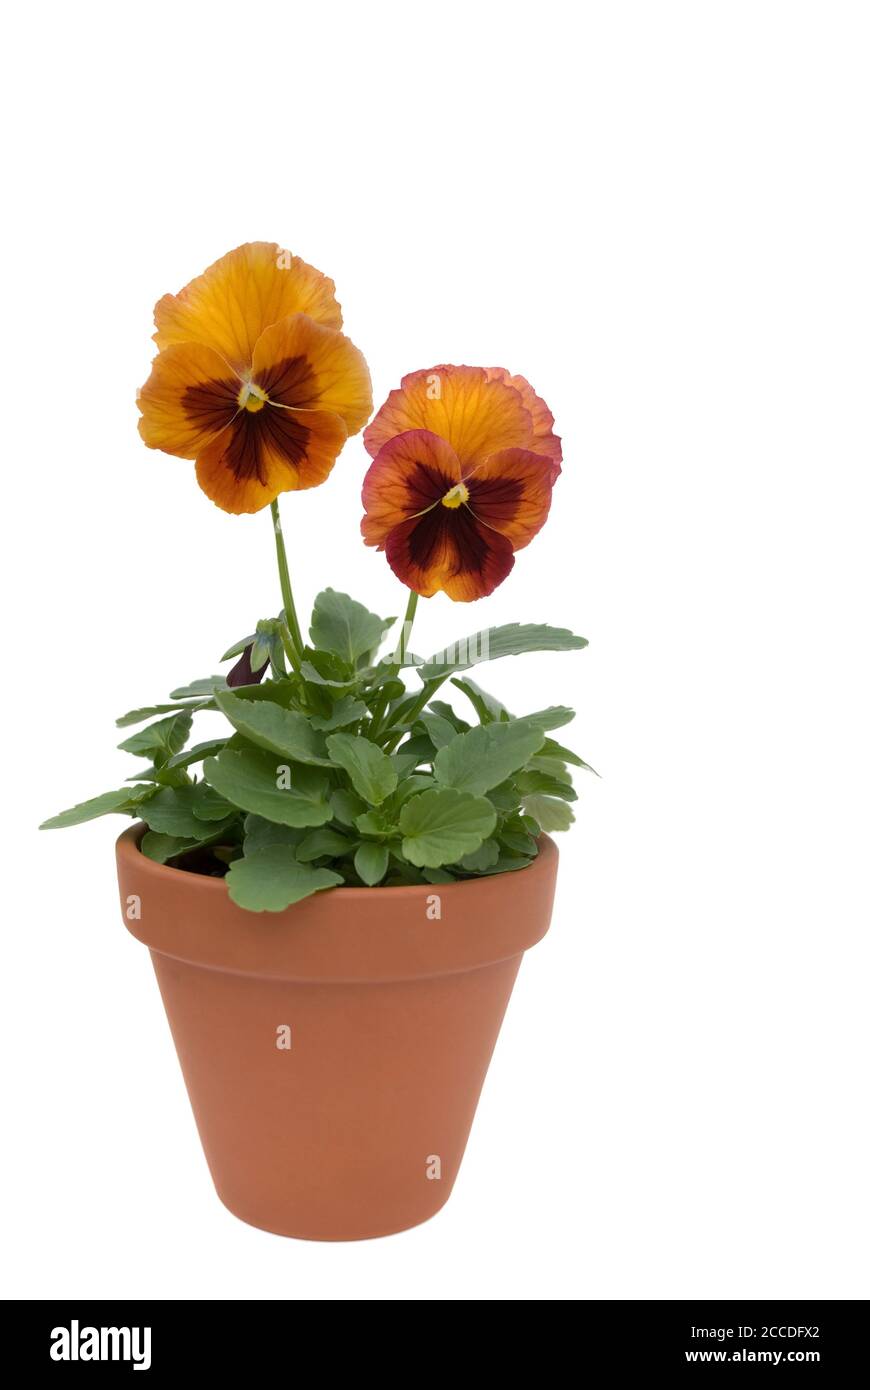 isolated pansies in flower pot against white background Stock Photo